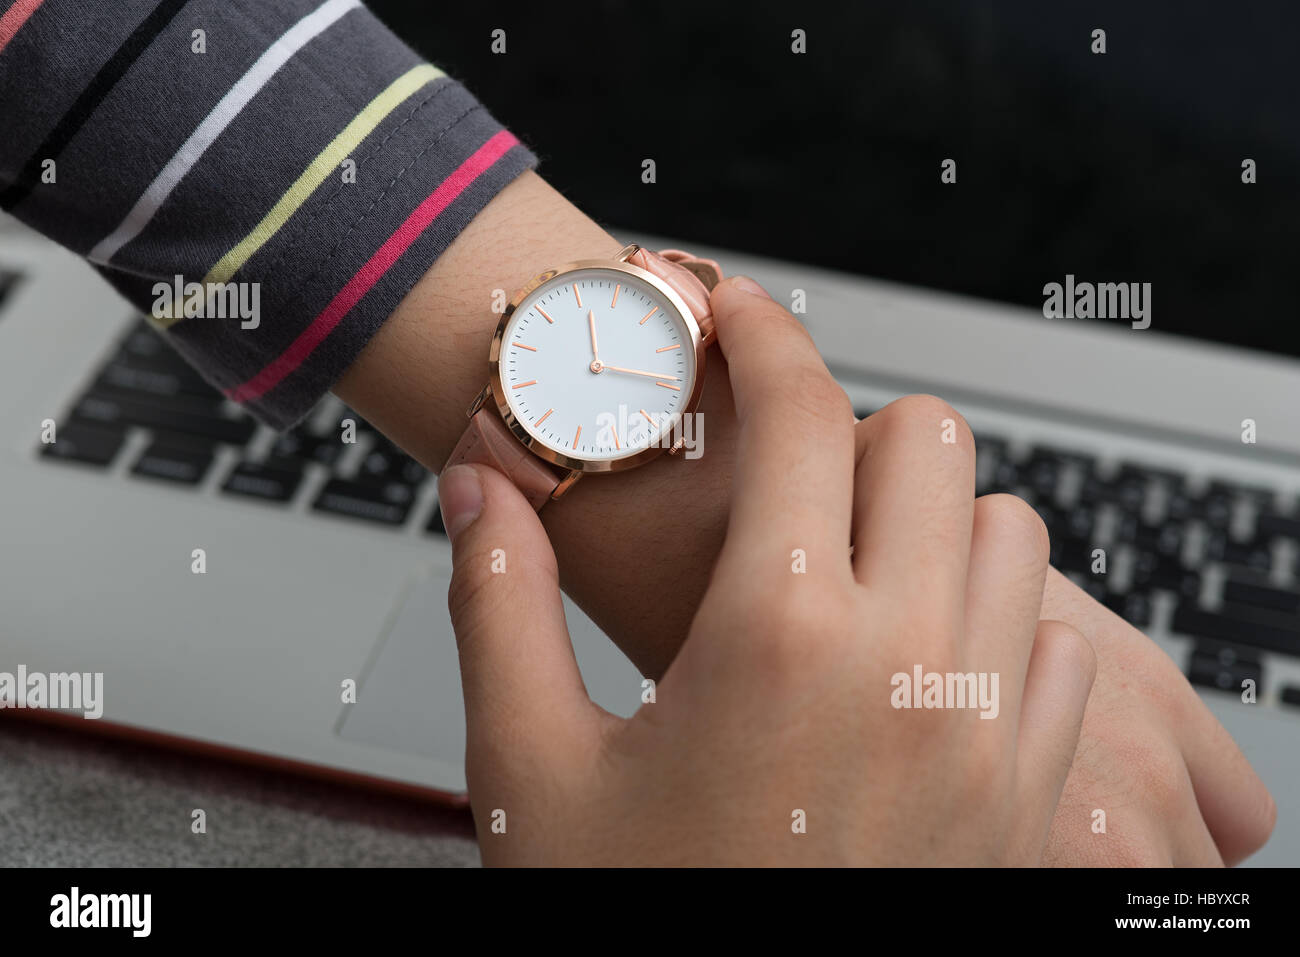 Girl's hand with wrist watch in front of notebook computer Stock Photo